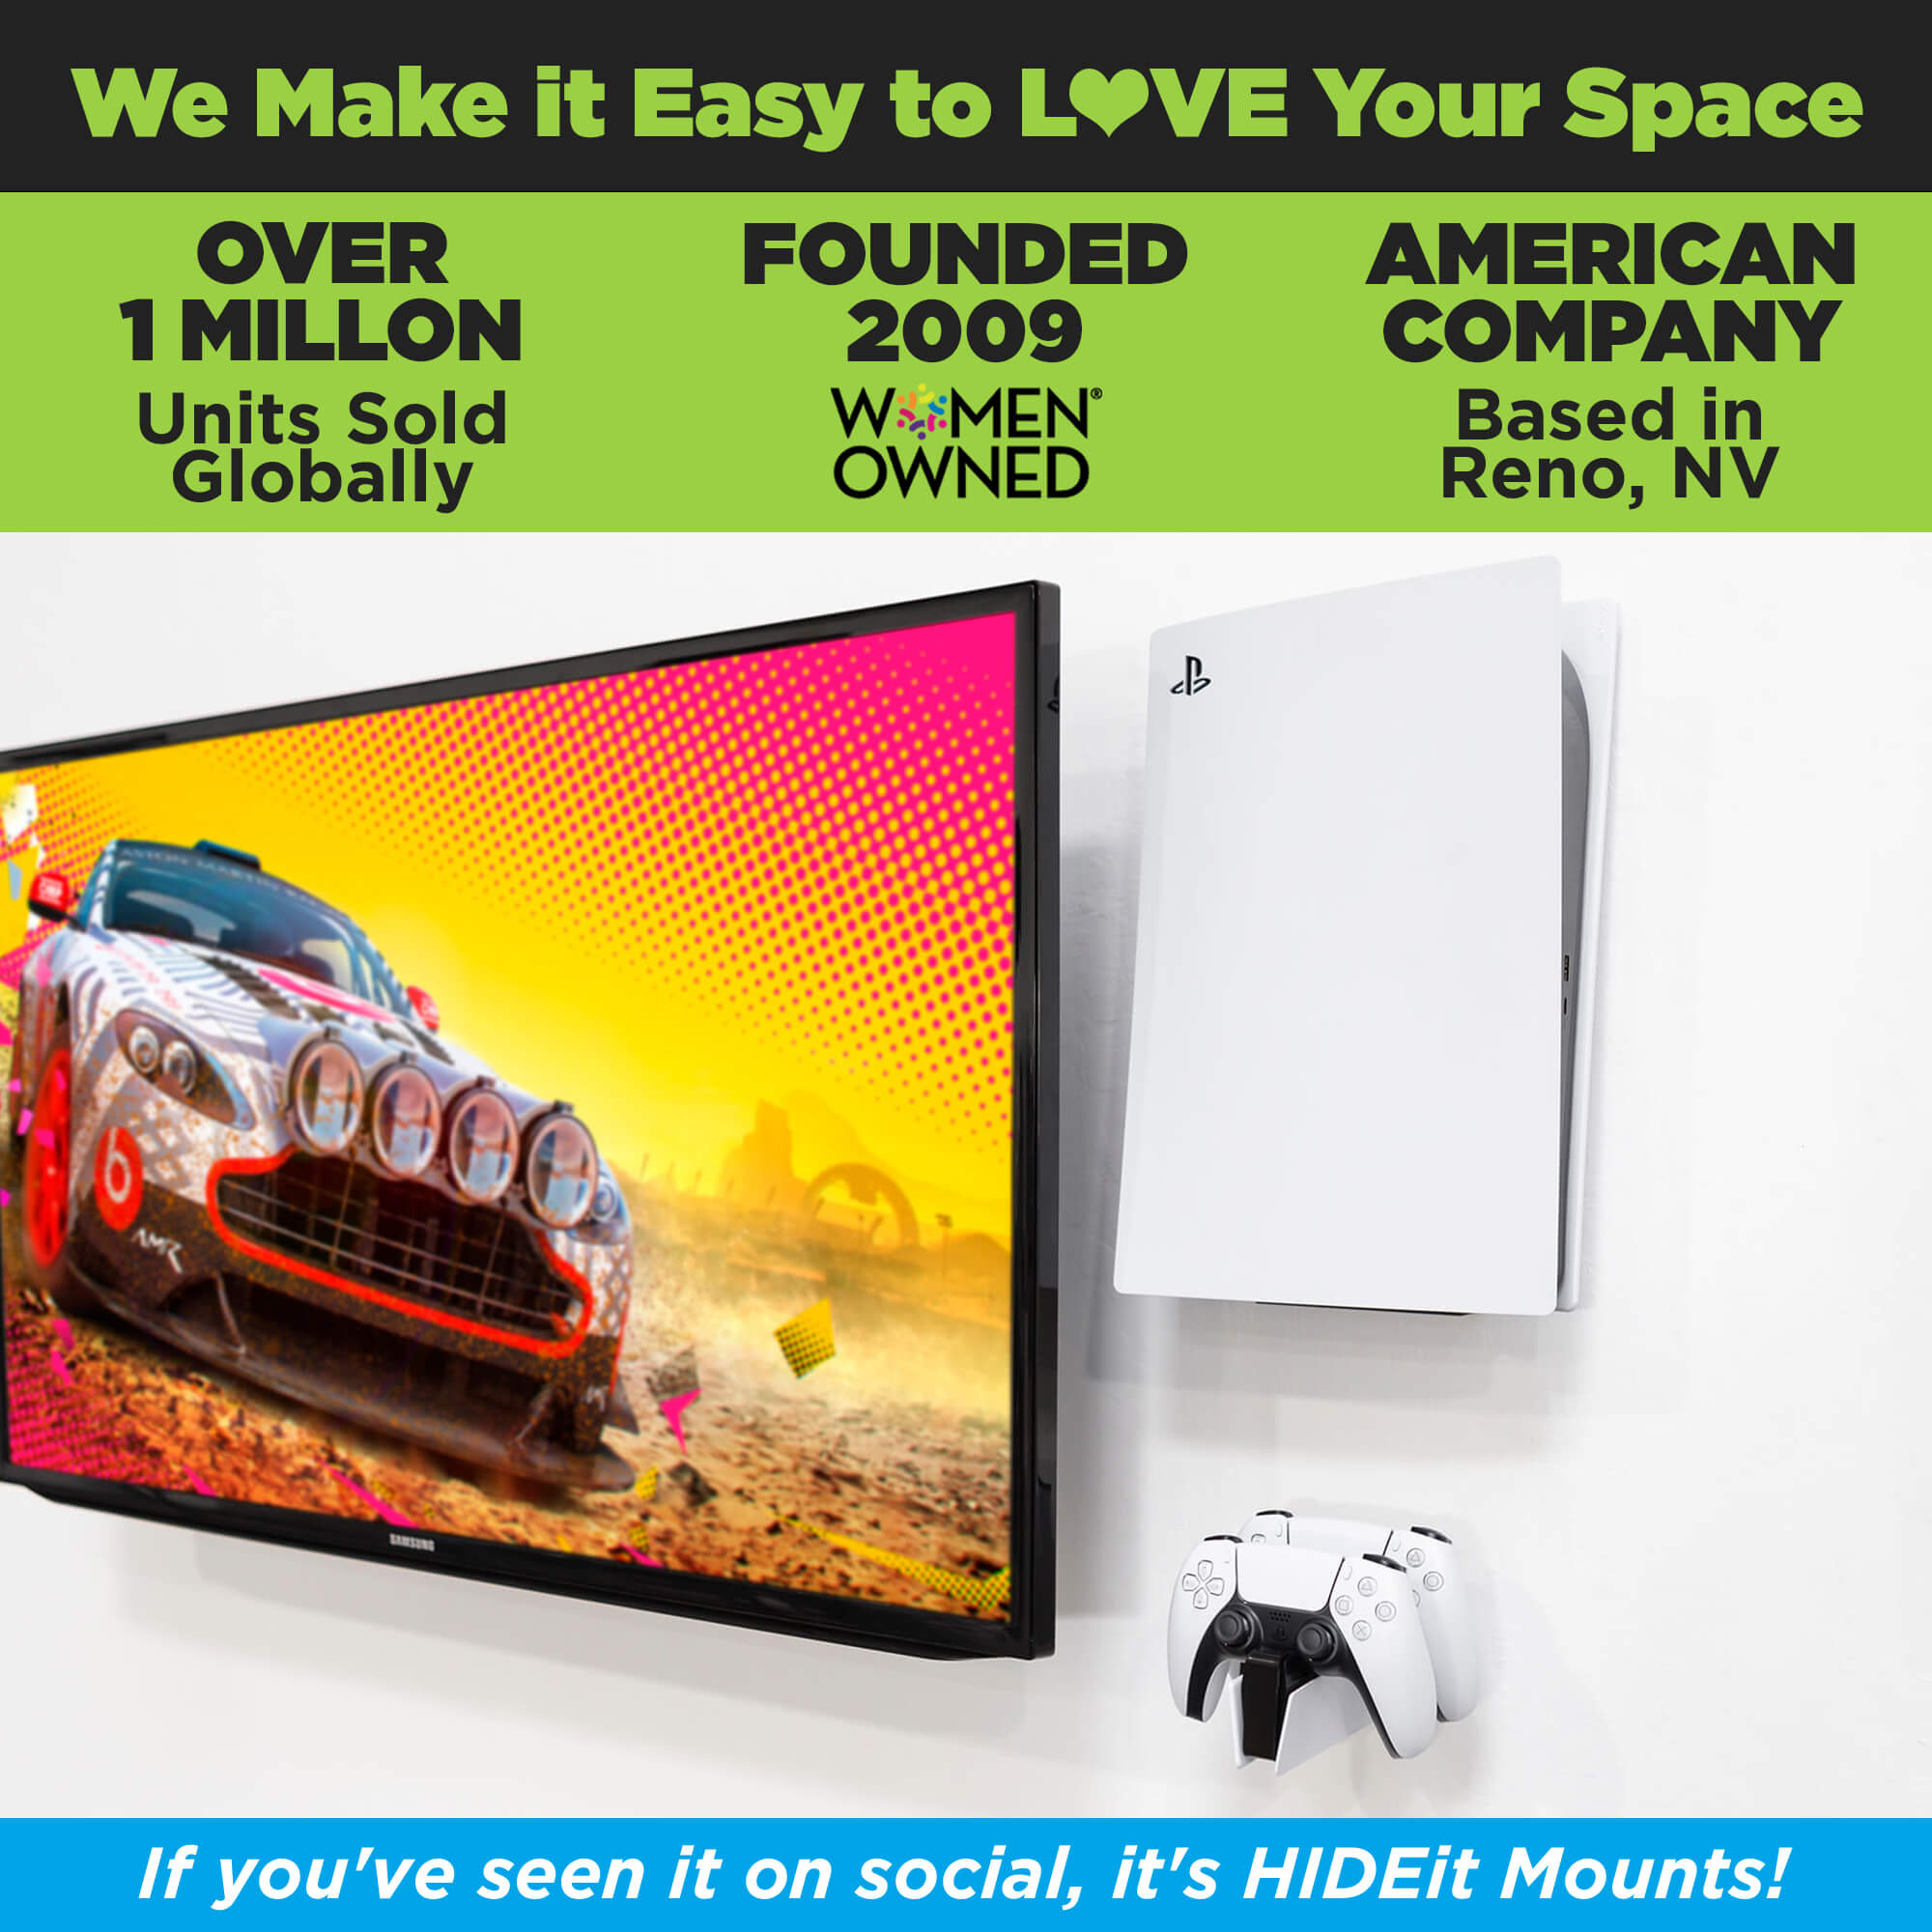  HIDEit Mounts makes it easy to love your space! HIDEit is an American company with over 1 million units sold globally.